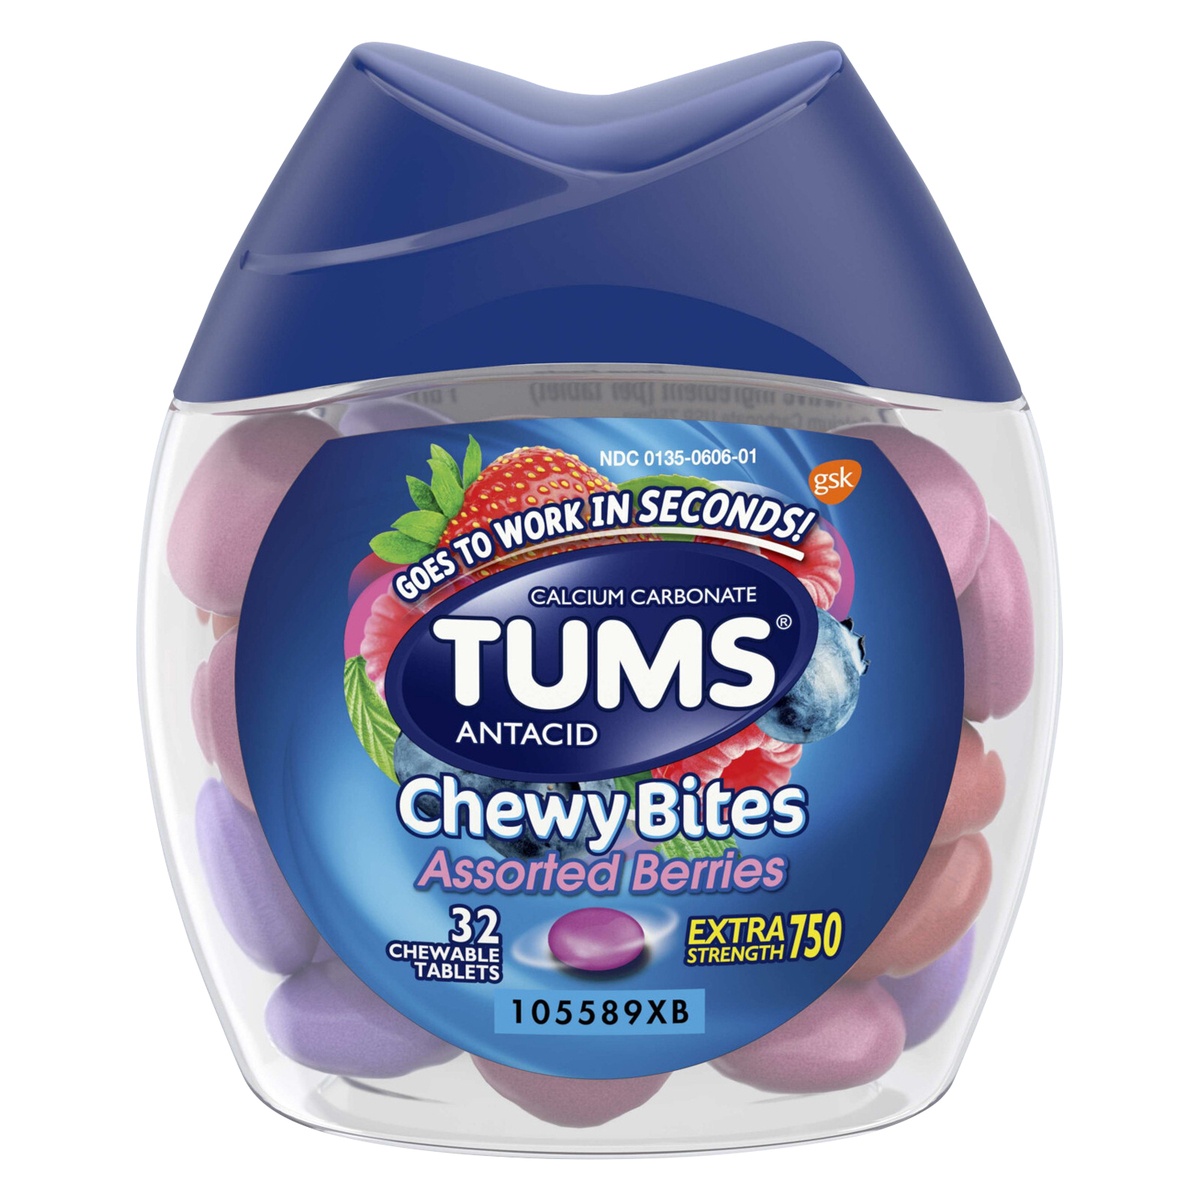 slide 1 of 1, TUMS Chewy Bites Chewable Antacid Tablets for Heartburn Relief, Assorted Berries - 32 Count, 32 ct